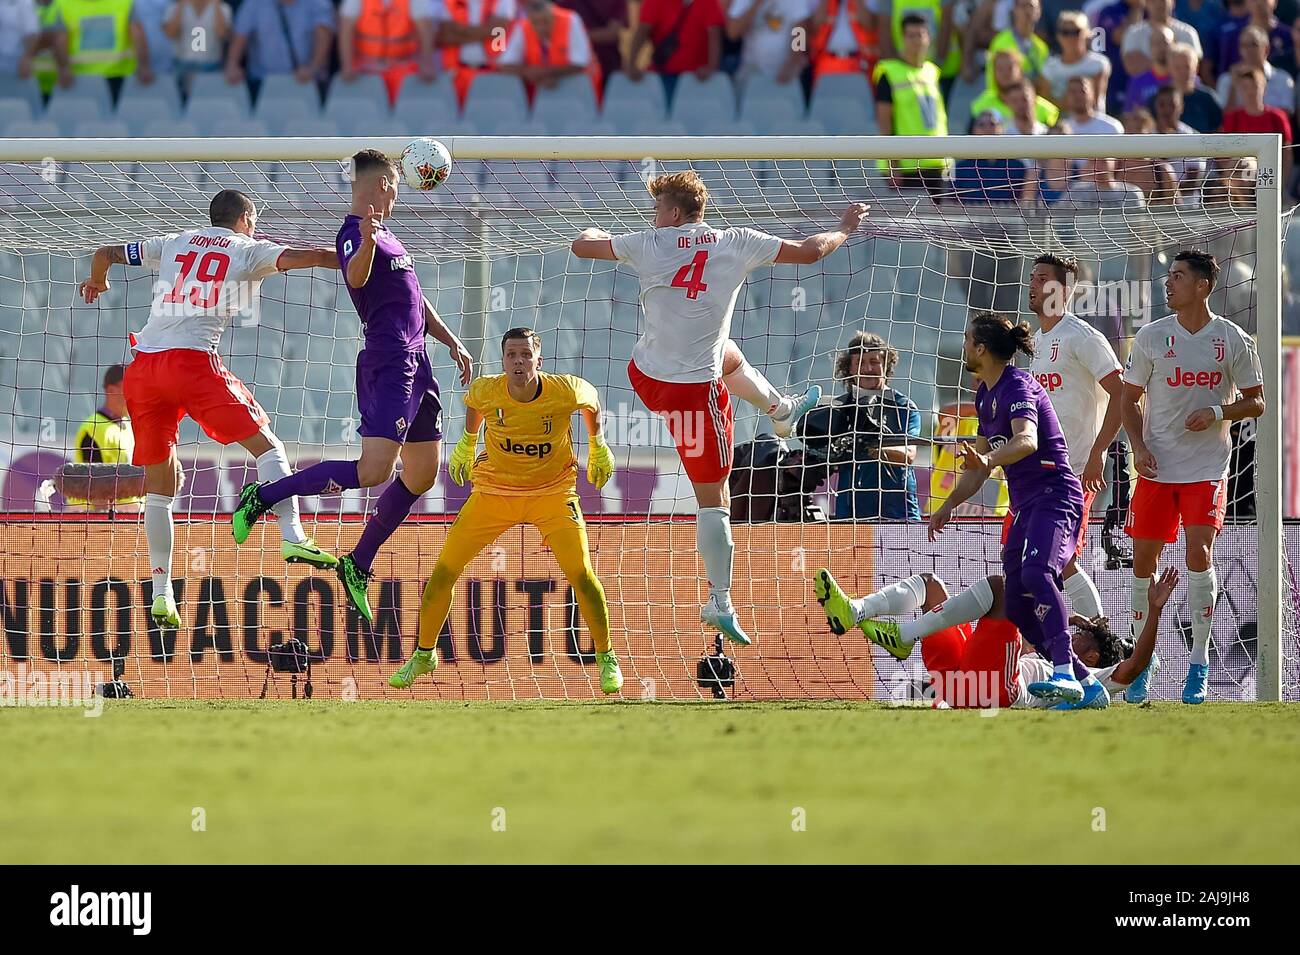 Florence, Italy. 14 September, 2019: Nikola Milenkovic (C) of ACF Fiorentina competes for a header with Leonardo Bonucci (L) and Matthijs de Ligt of Juventus FC during the Serie A football match between ACF Fiorentina and Juventus FC. The match ended in a 0-0 tie. Credit: Nicolò Campo/Alamy Live News Stock Photo